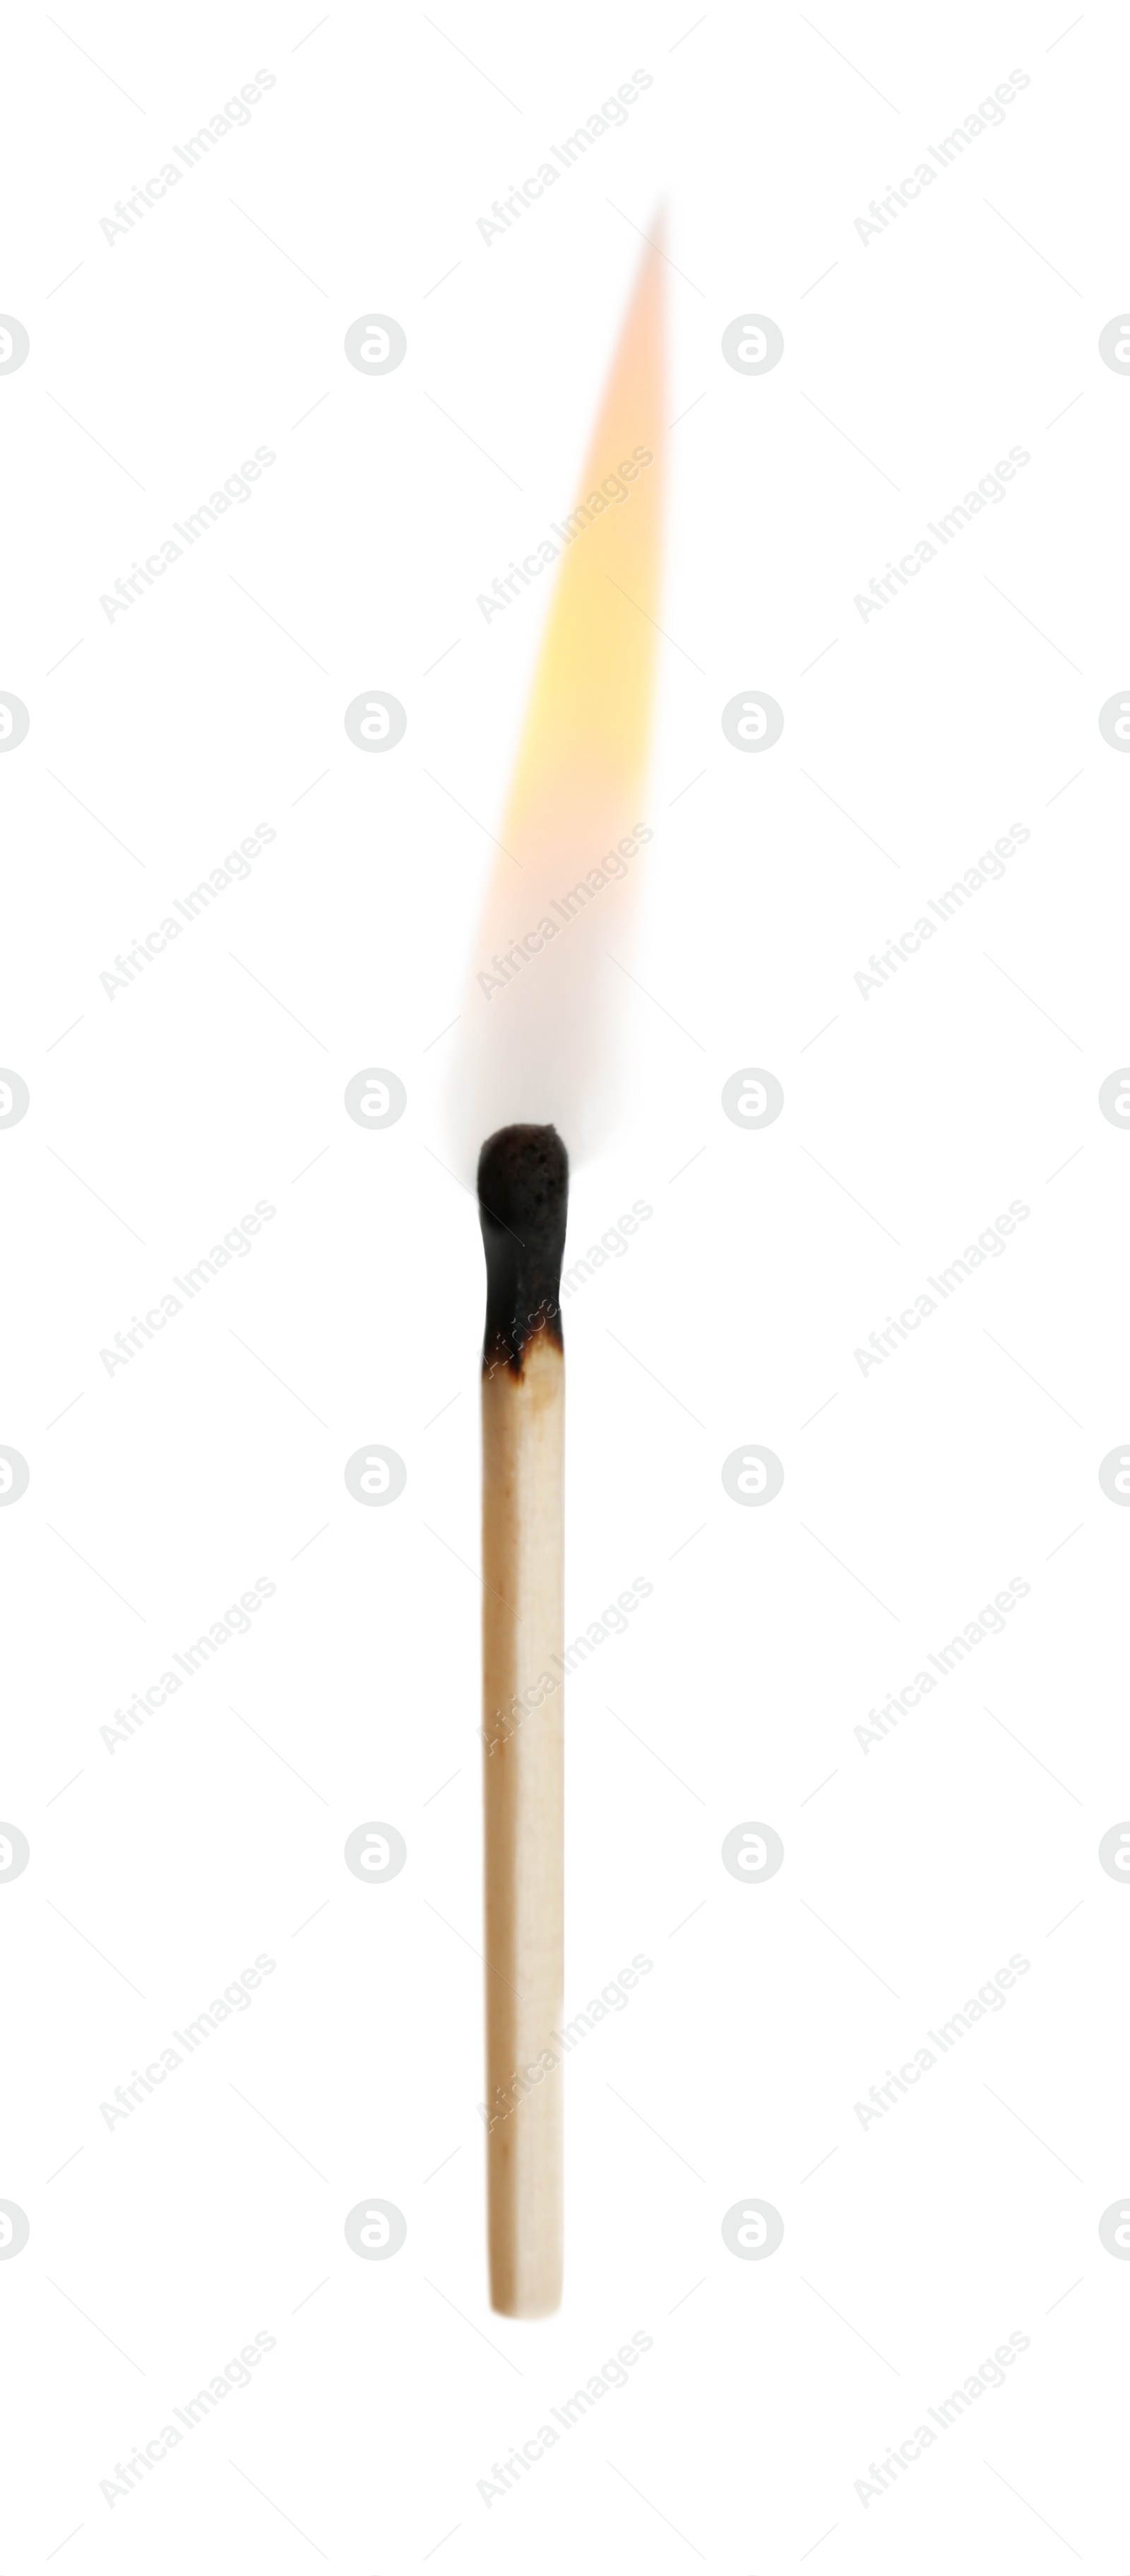 Photo of Burning match with flame on white background